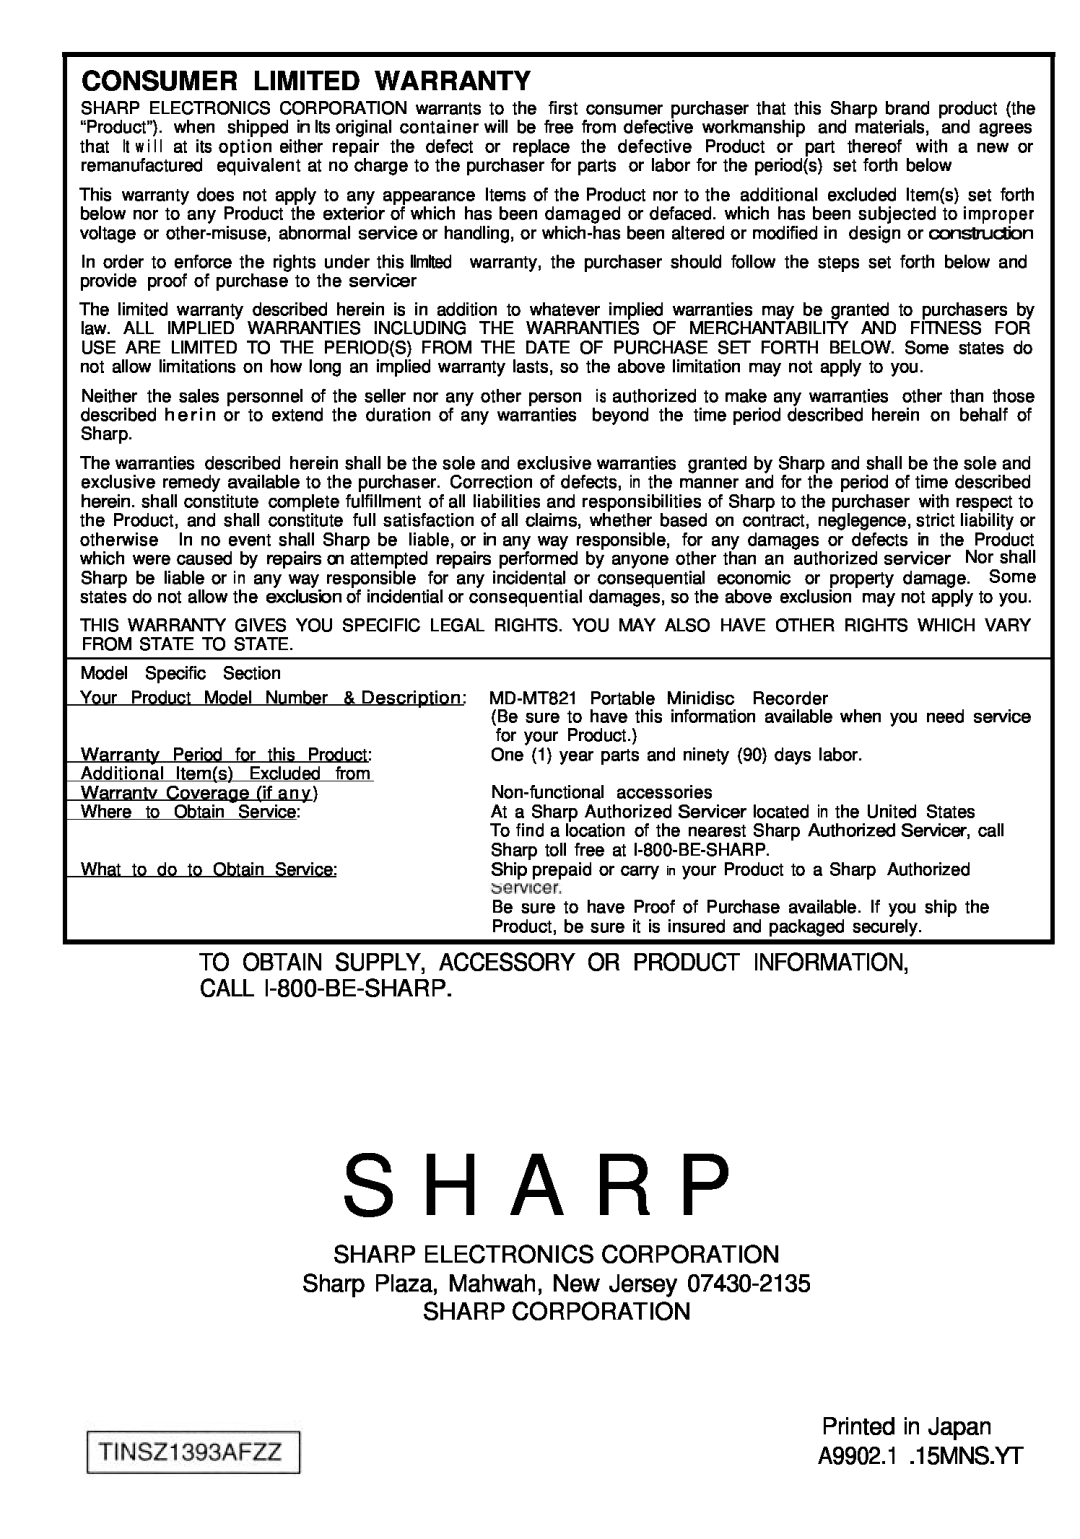 Sharp MD-MT821 manual Consumer Limited Warranty, S H A R P 